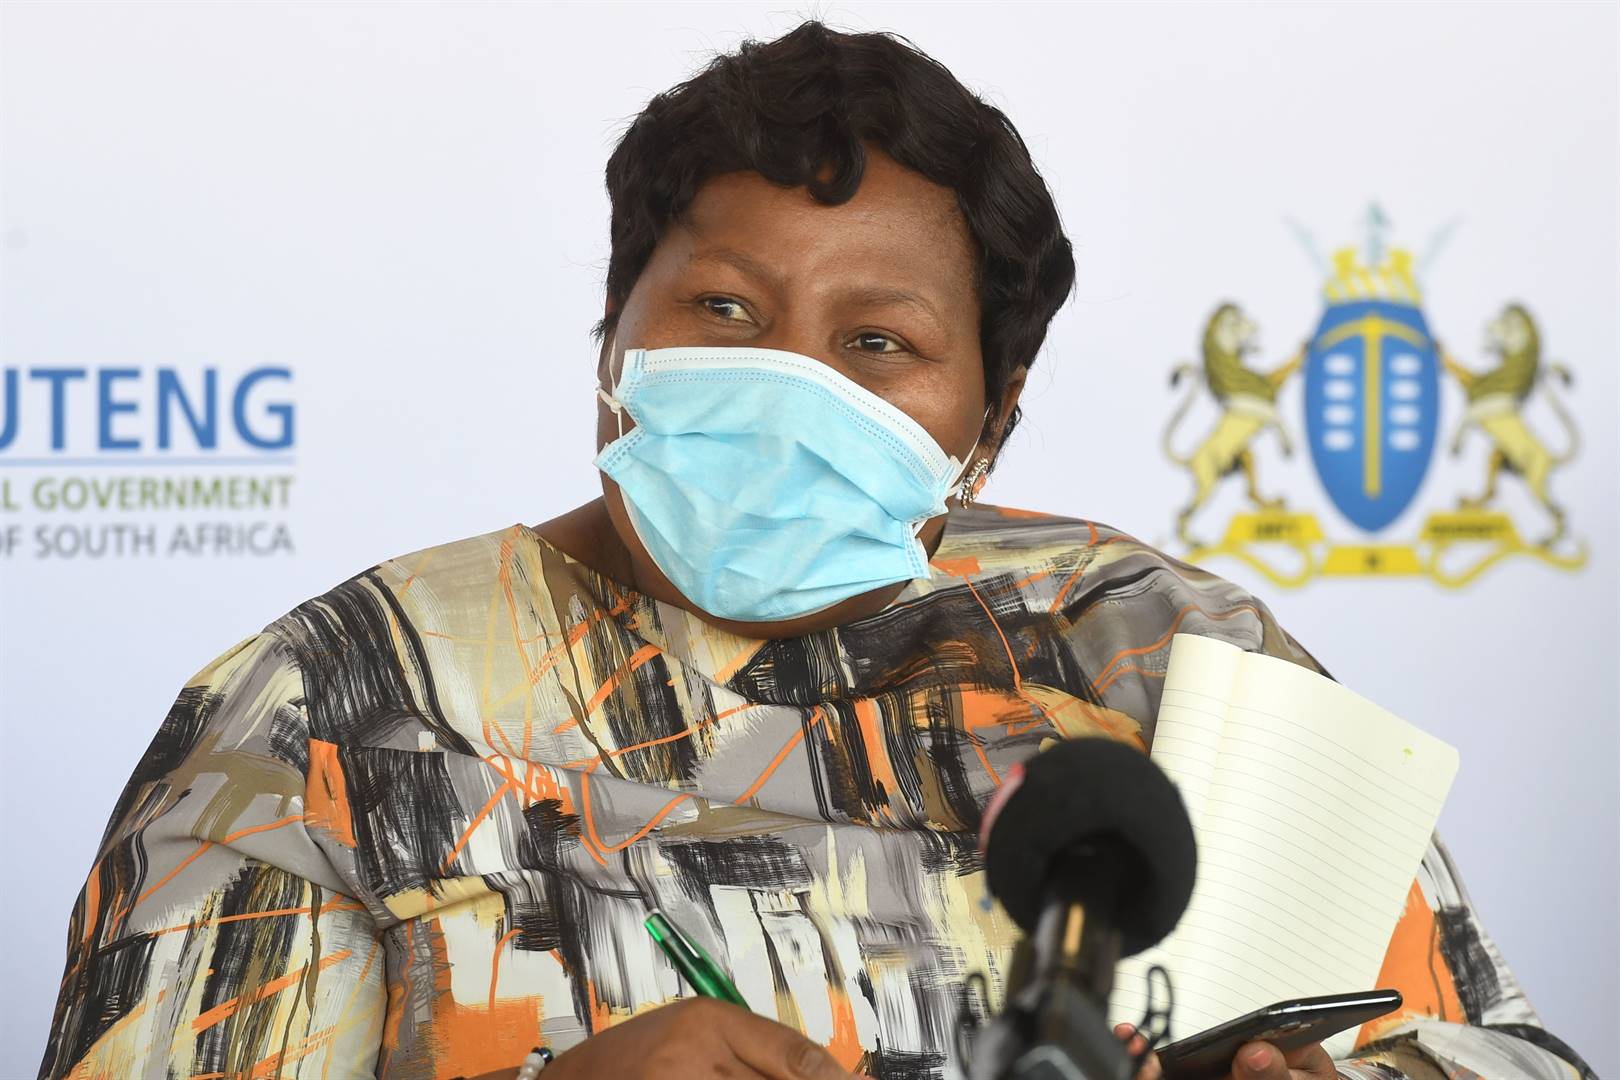 Gauteng Health MEC Dr Nomathemba Mokgethi says the Gauteng health department spent more than R45 million on the maintenance and repair of ambulances during the 2021/22 financial year. Photo: Supplied